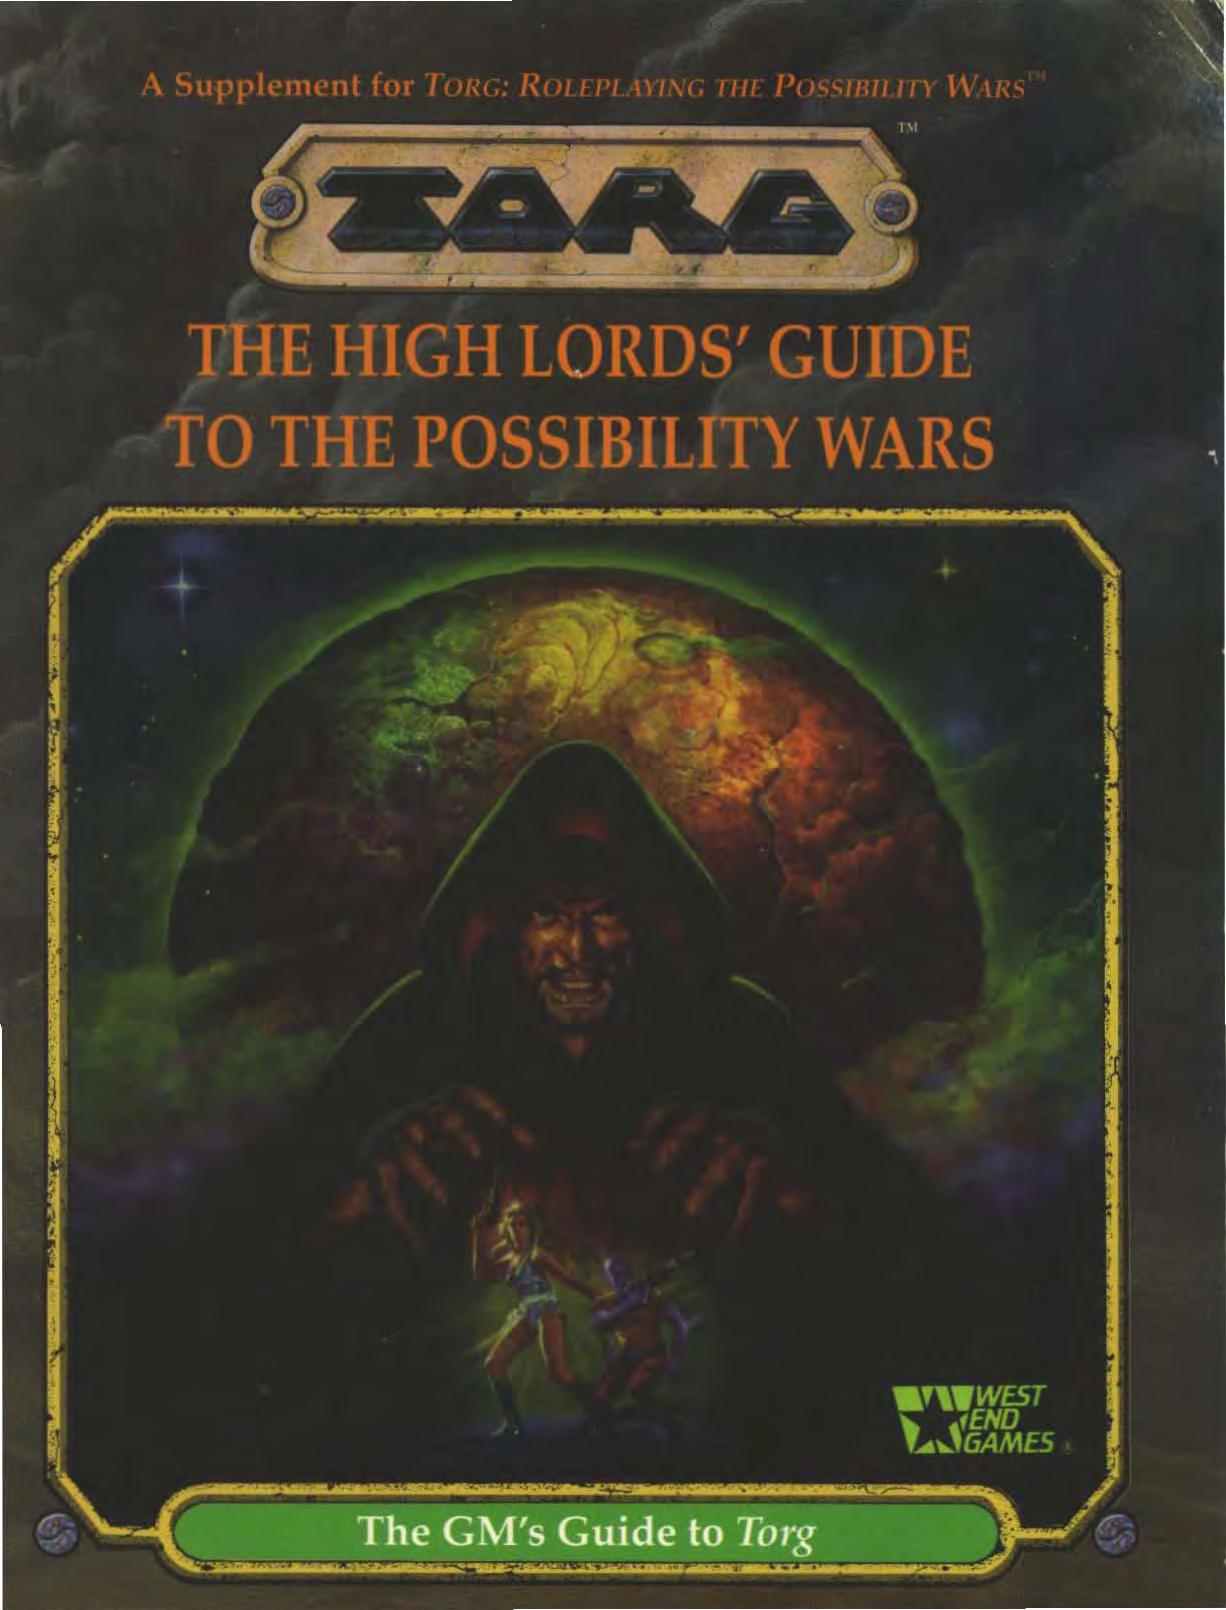 The High Lords' Guide To the Possibility Wars